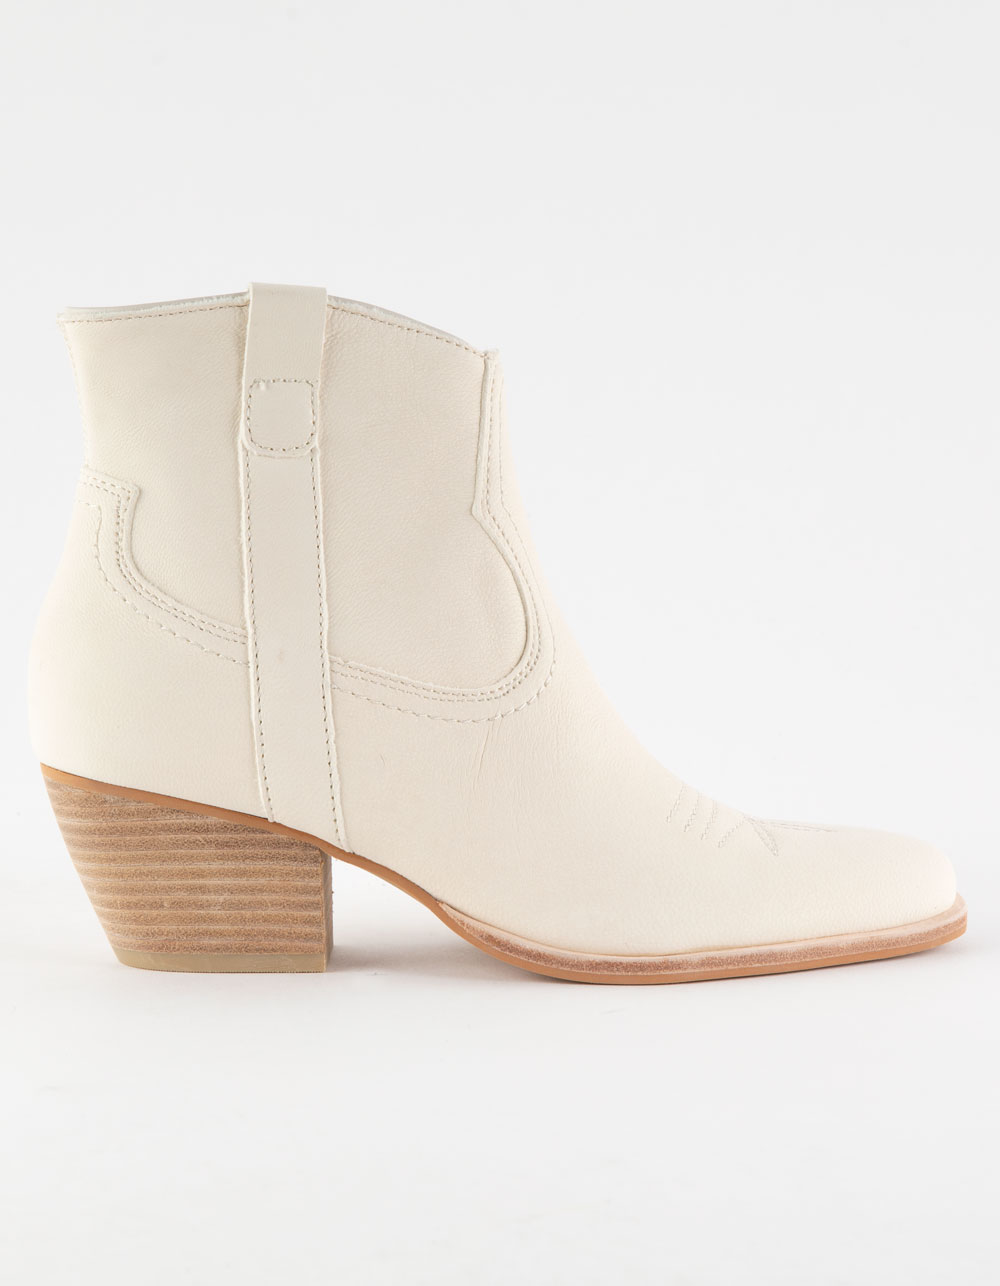 DOLCE VITA Silma Womens Western Booties - IVORY | Tillys